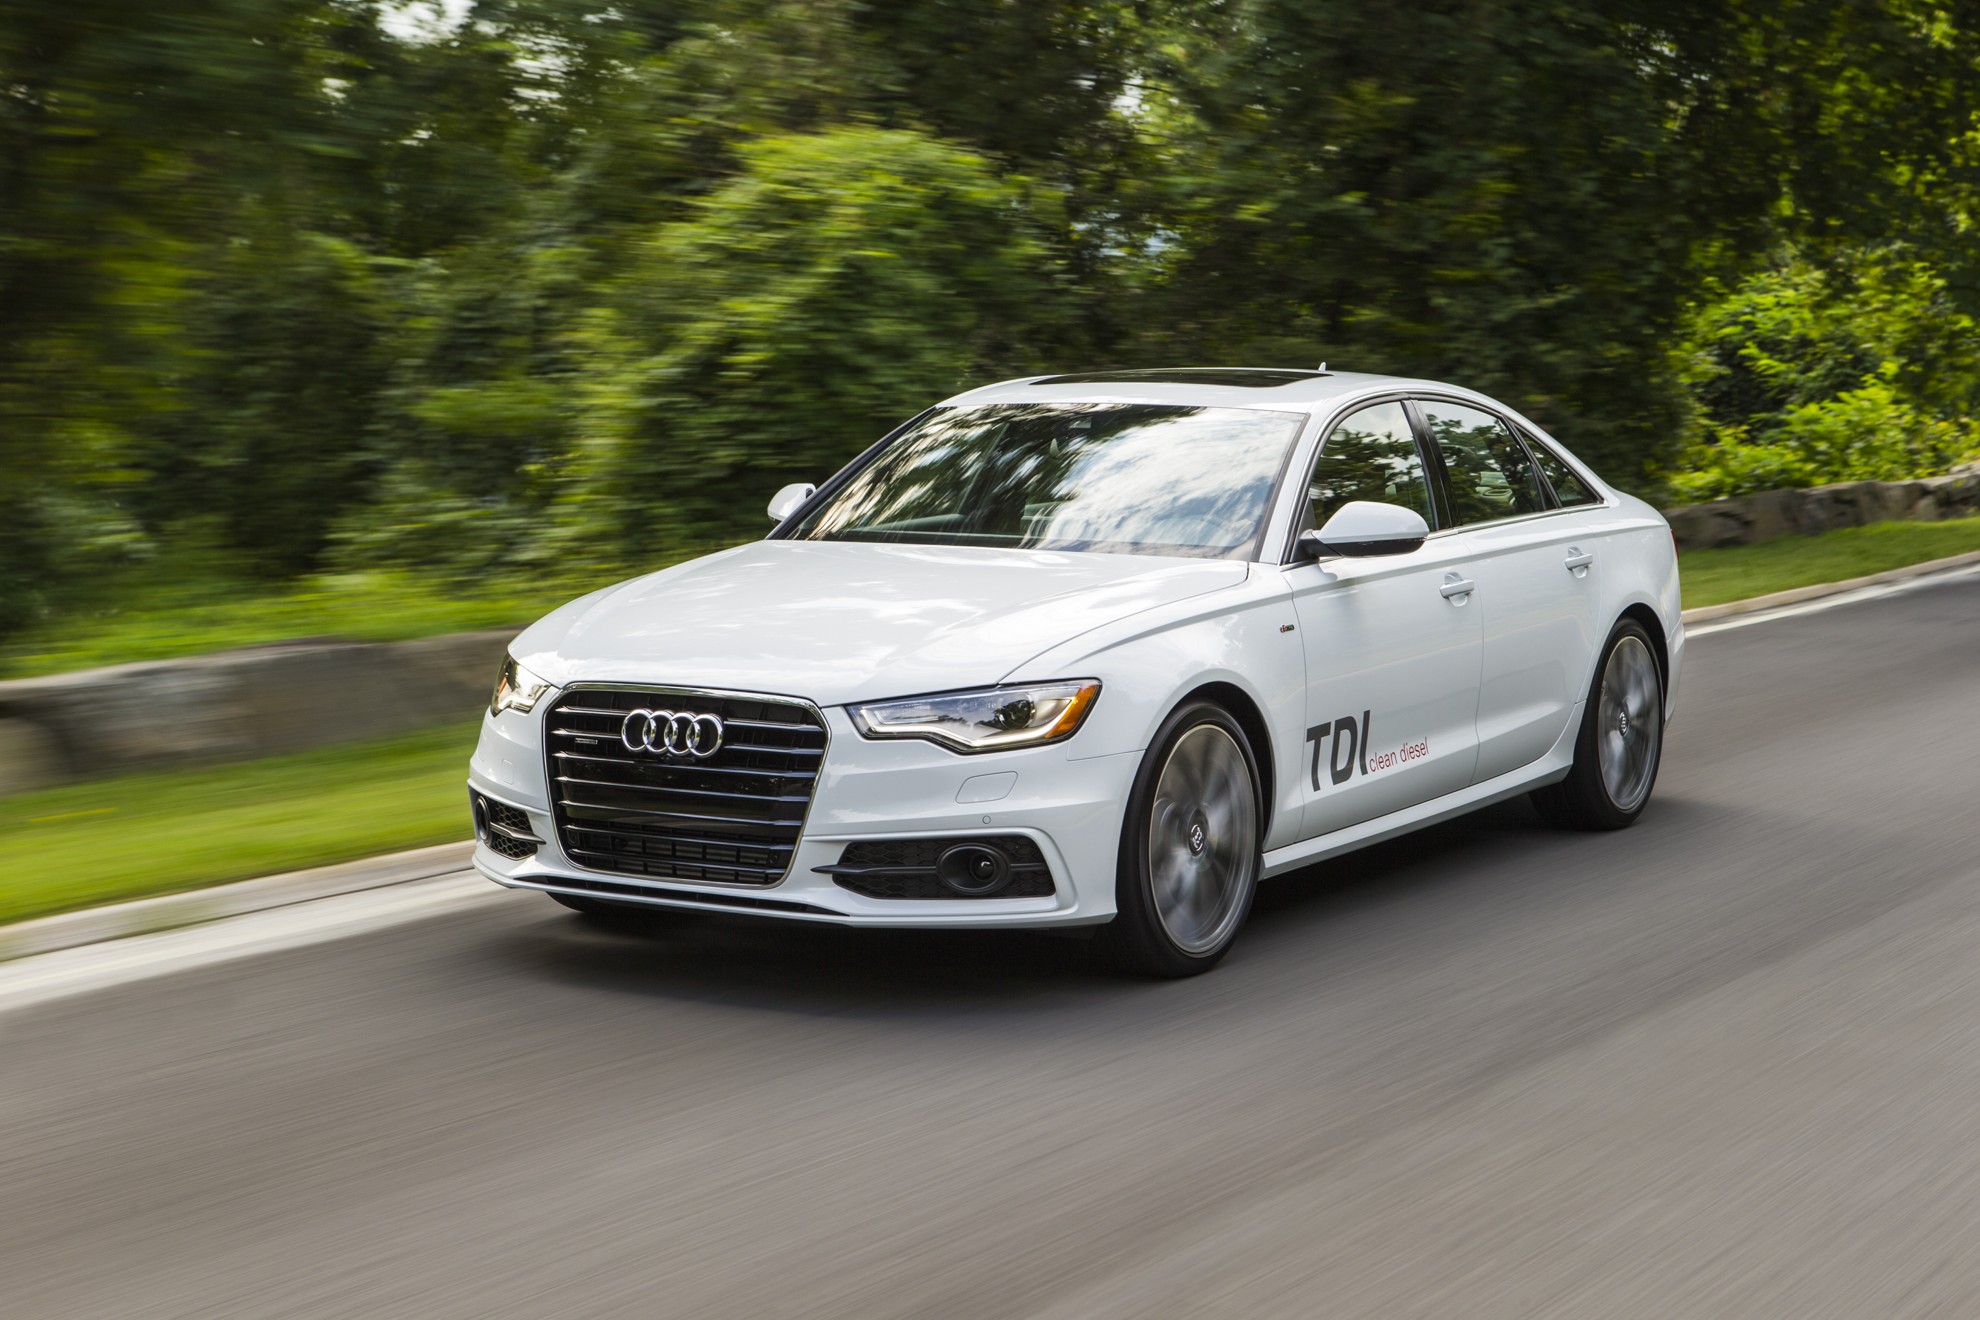 2014 AUDI A6 EARN 5-STAR US GOVERNMENT CRASH TEST RATINGS